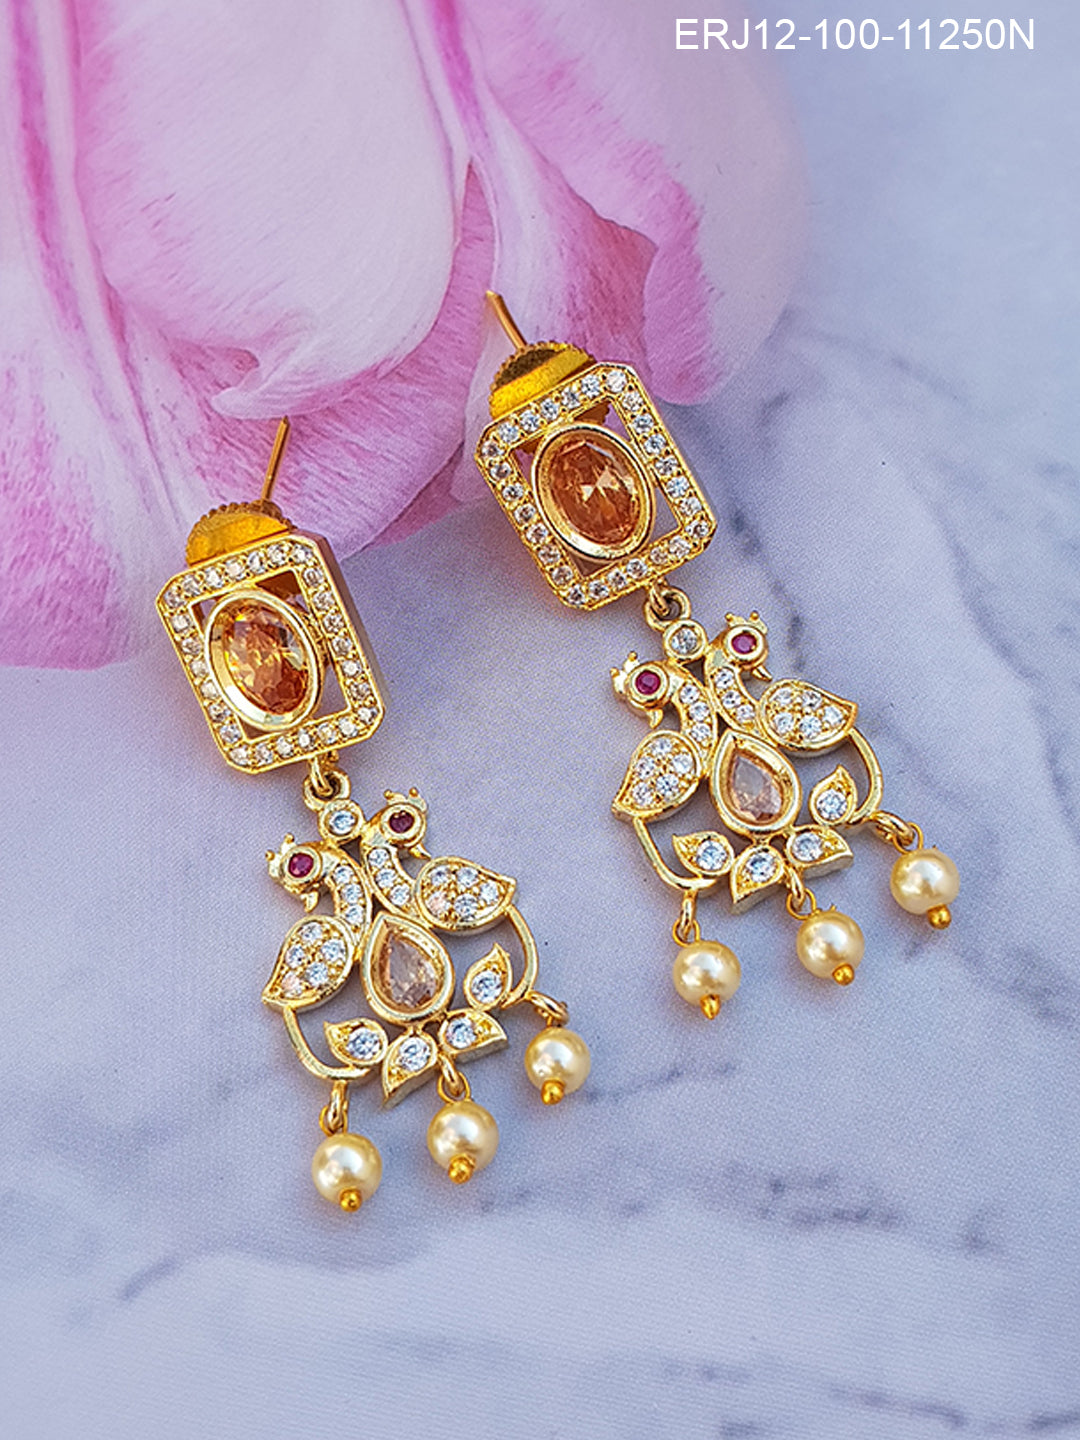 Gold Plated Stone Studded Long Jhumka / earrings / Hangings 11250N